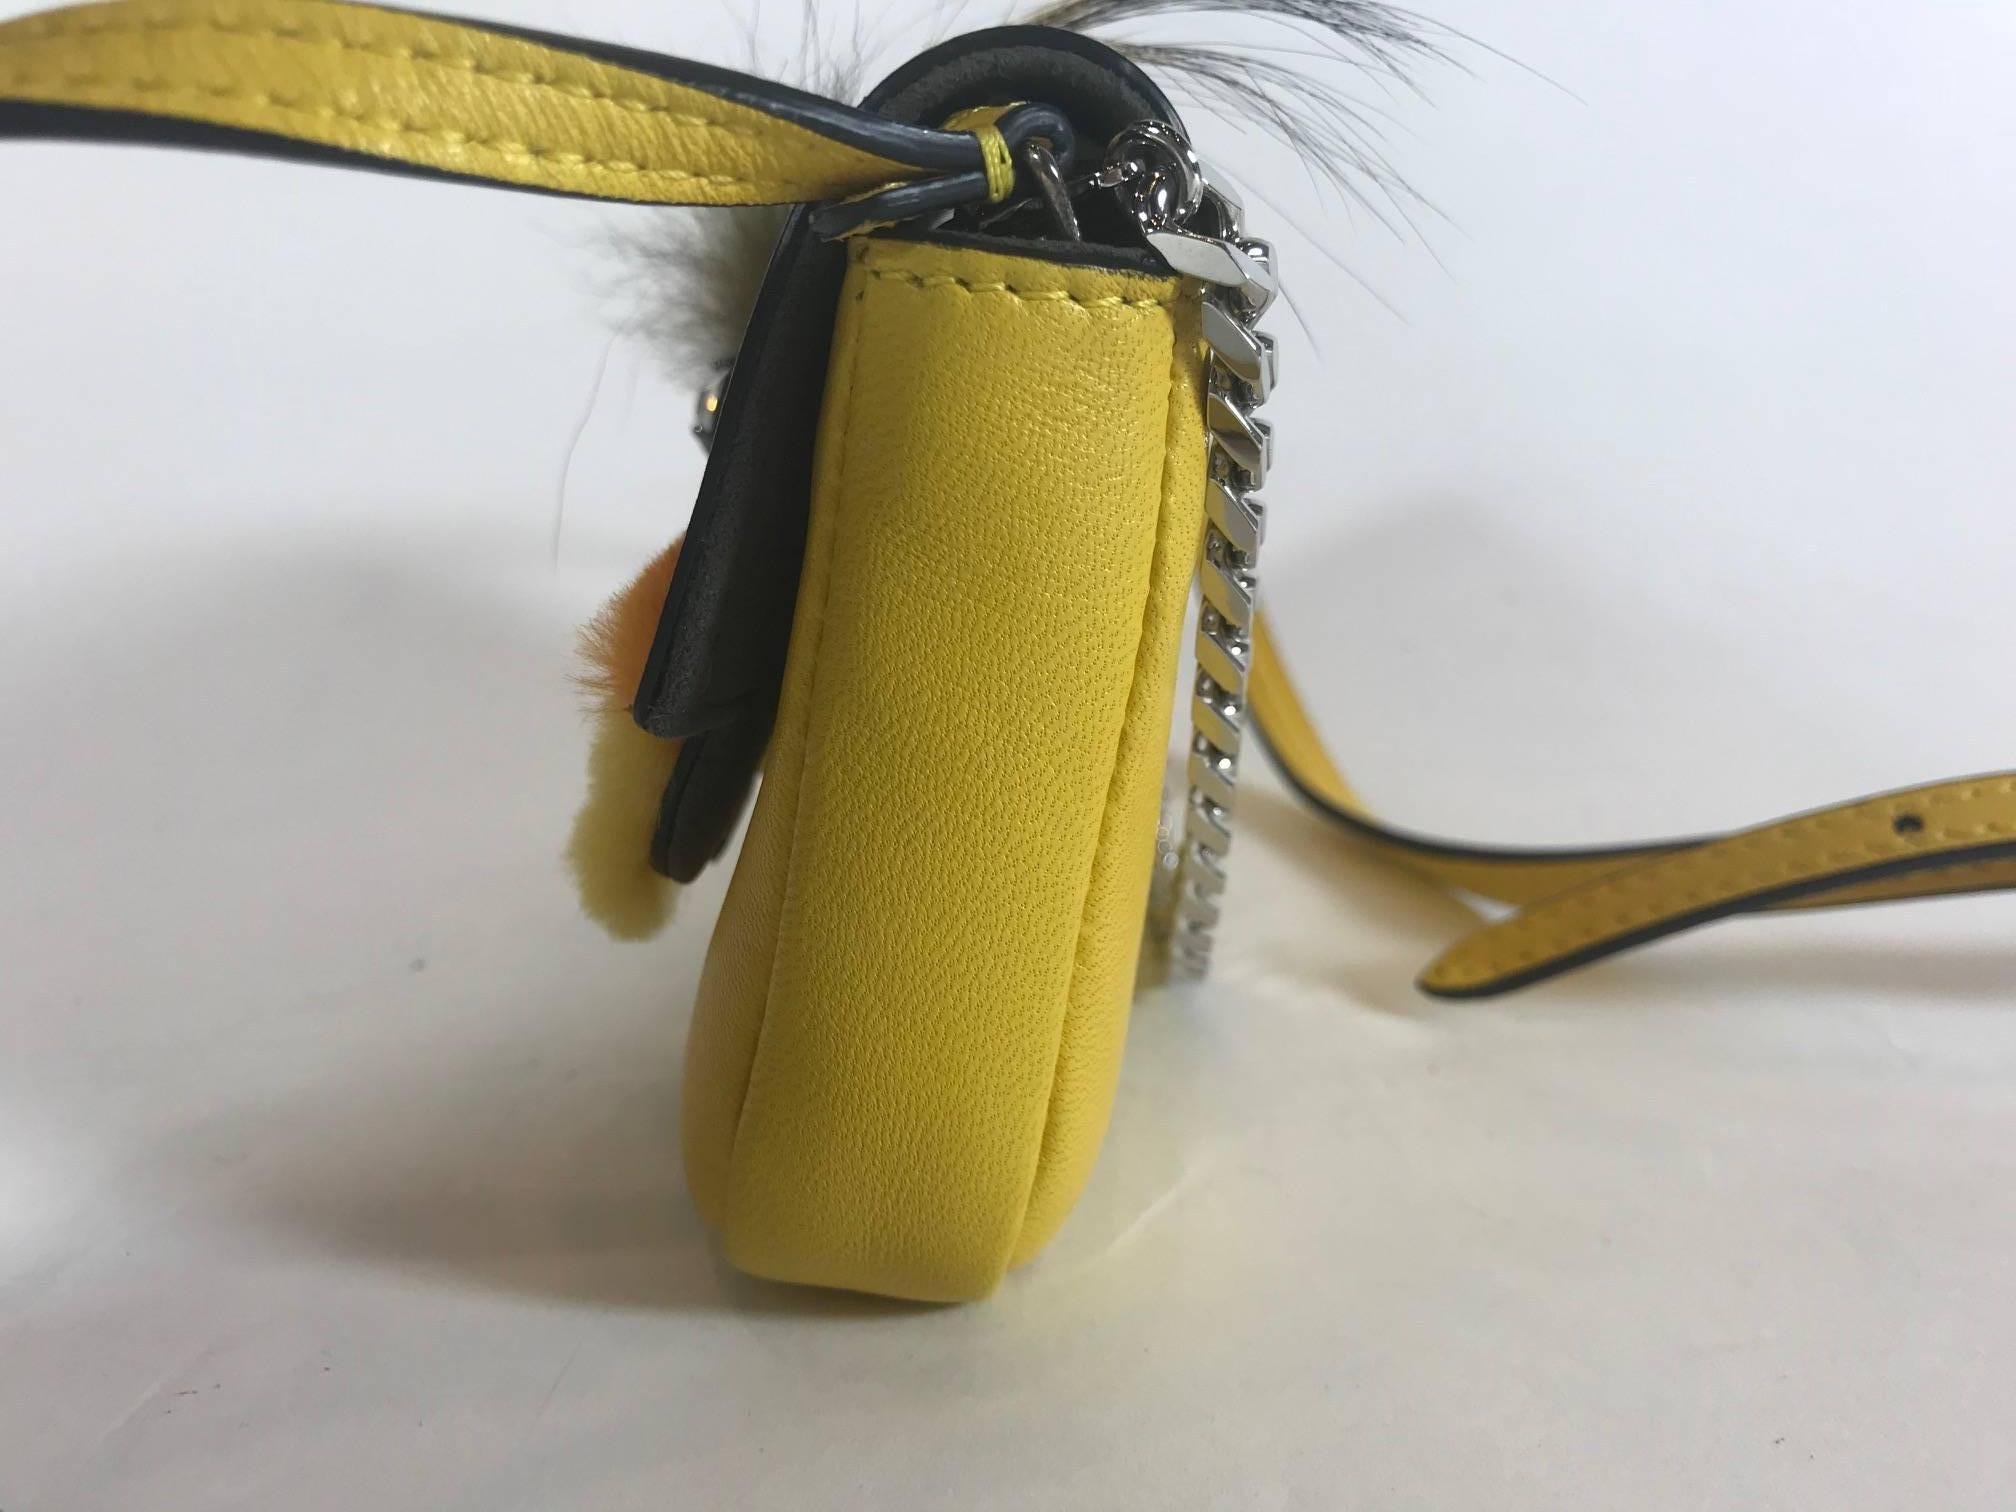 Fendi Micro Monster Baguette In Excellent Condition For Sale In Roslyn, NY